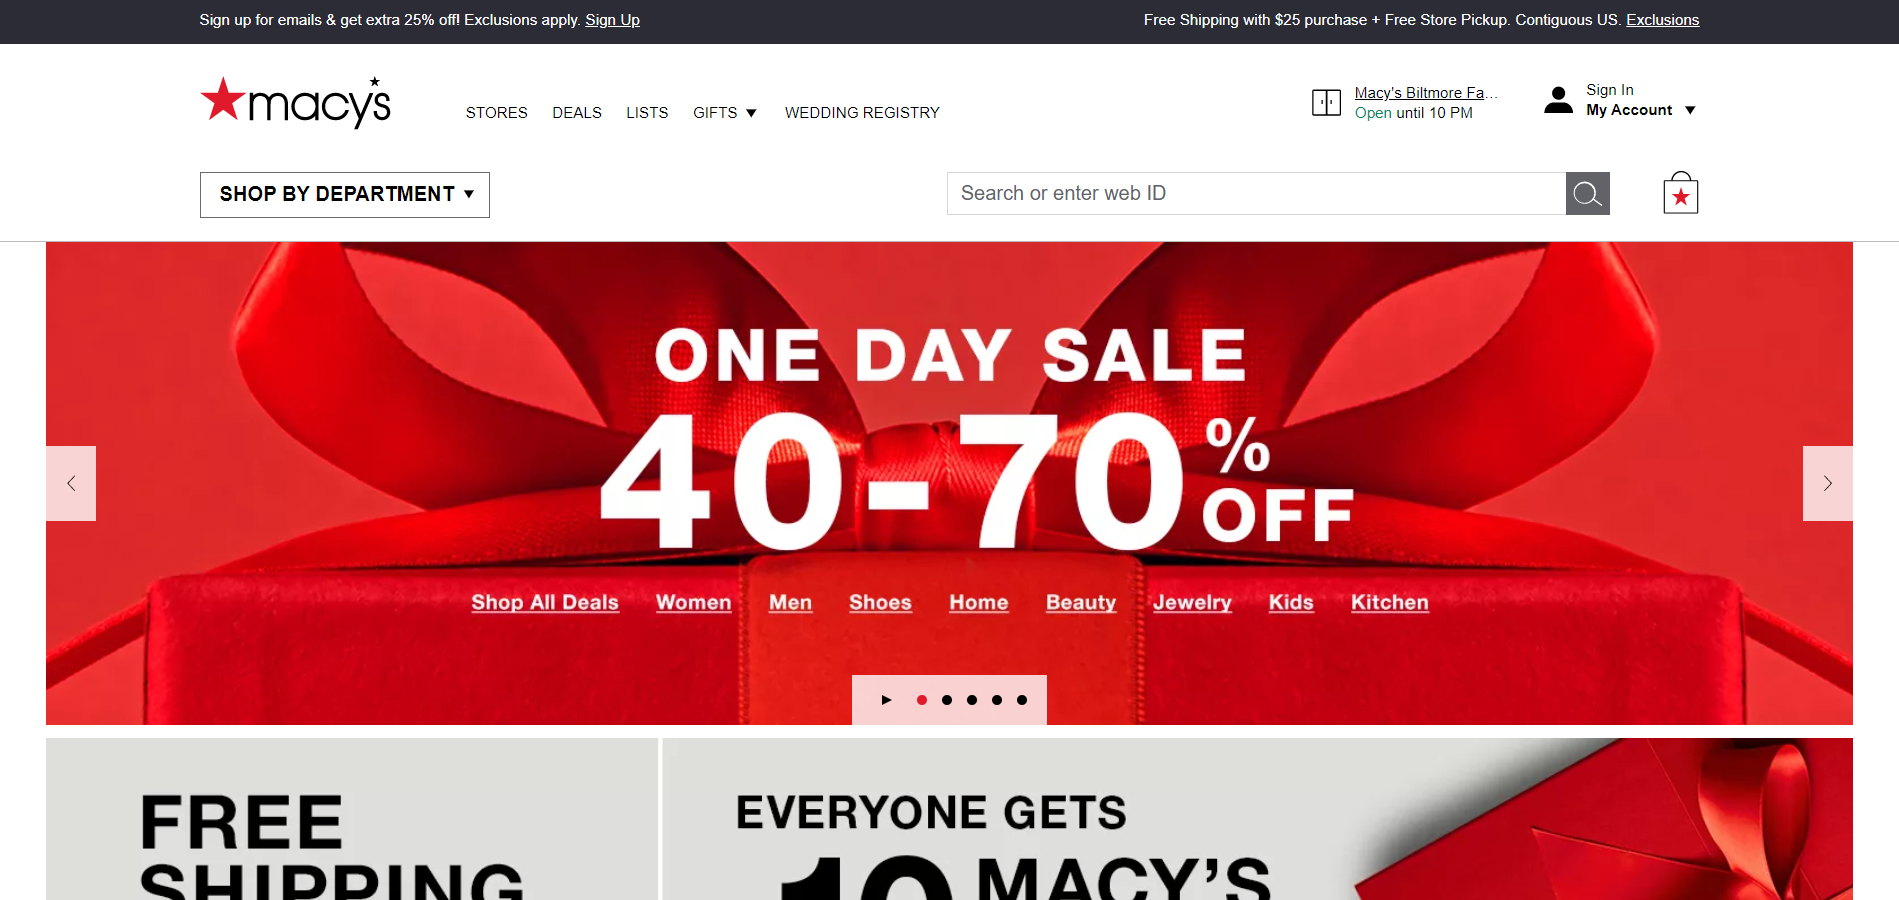 A screenshot of the Macy's holiday website